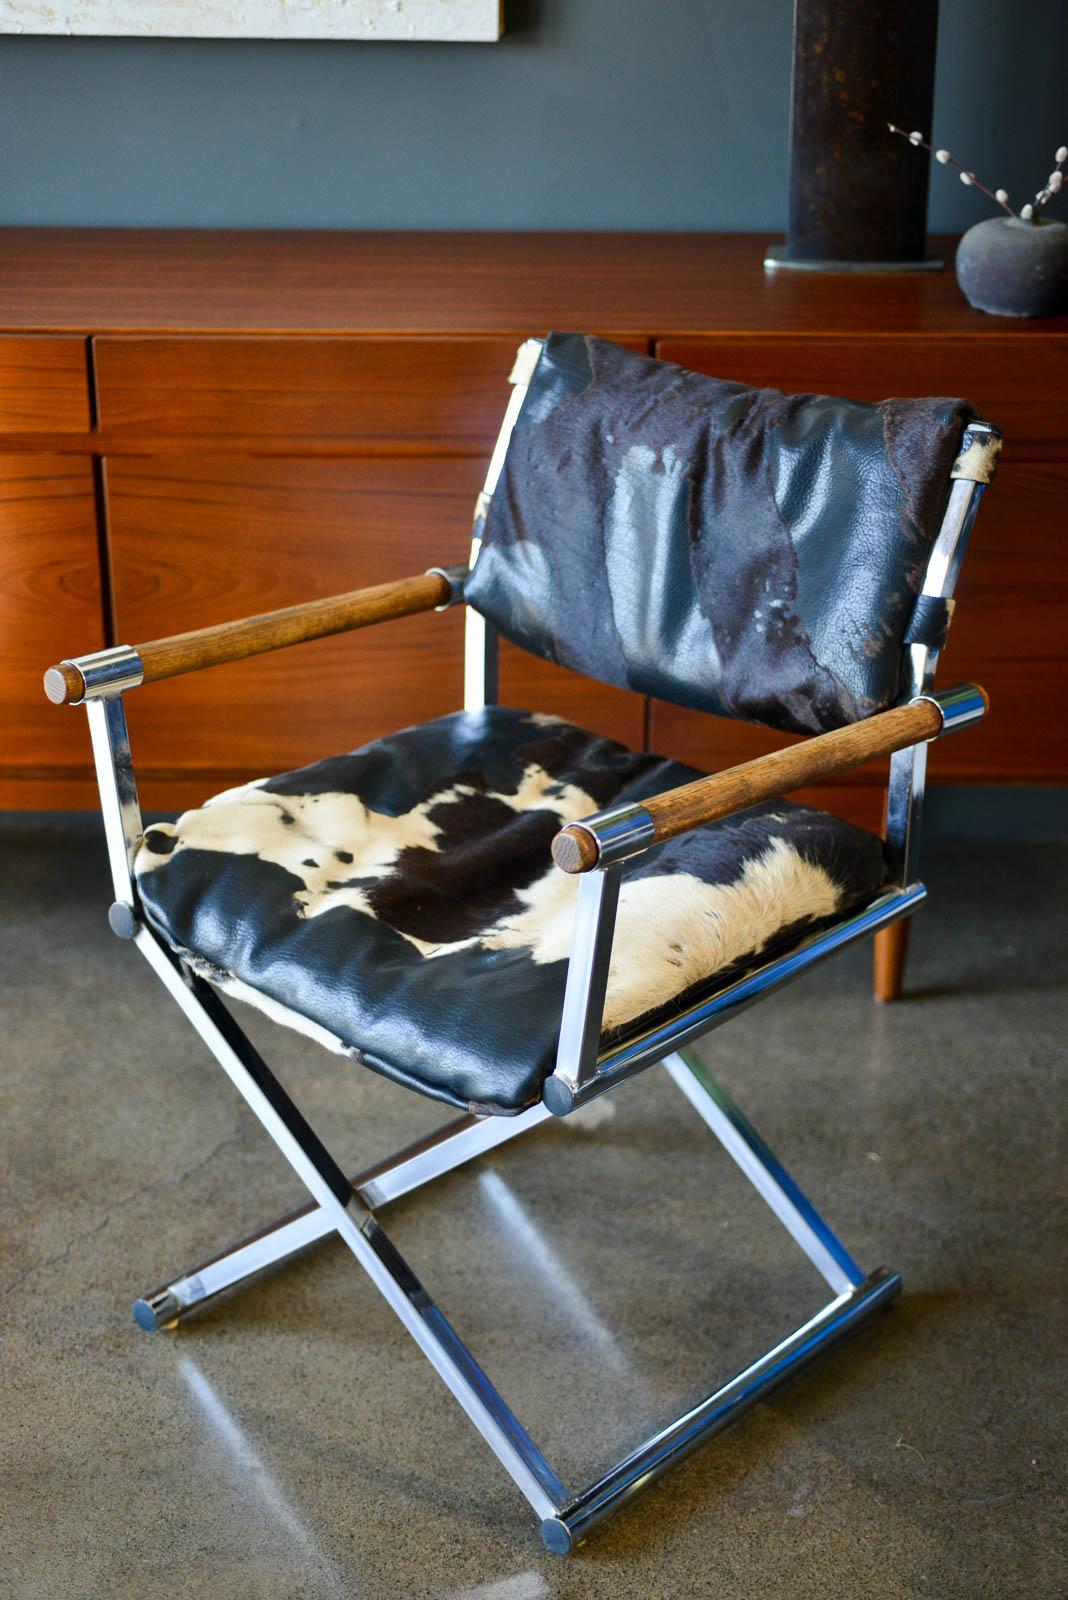 Vintage chrome and cowhide directors chair, ca. 1970. Beautiful cowhide leather with oak armrests. Chrome has been polished with only slight wear and leather has beautiful soft worn patina. Very good original condition.

Measures 23